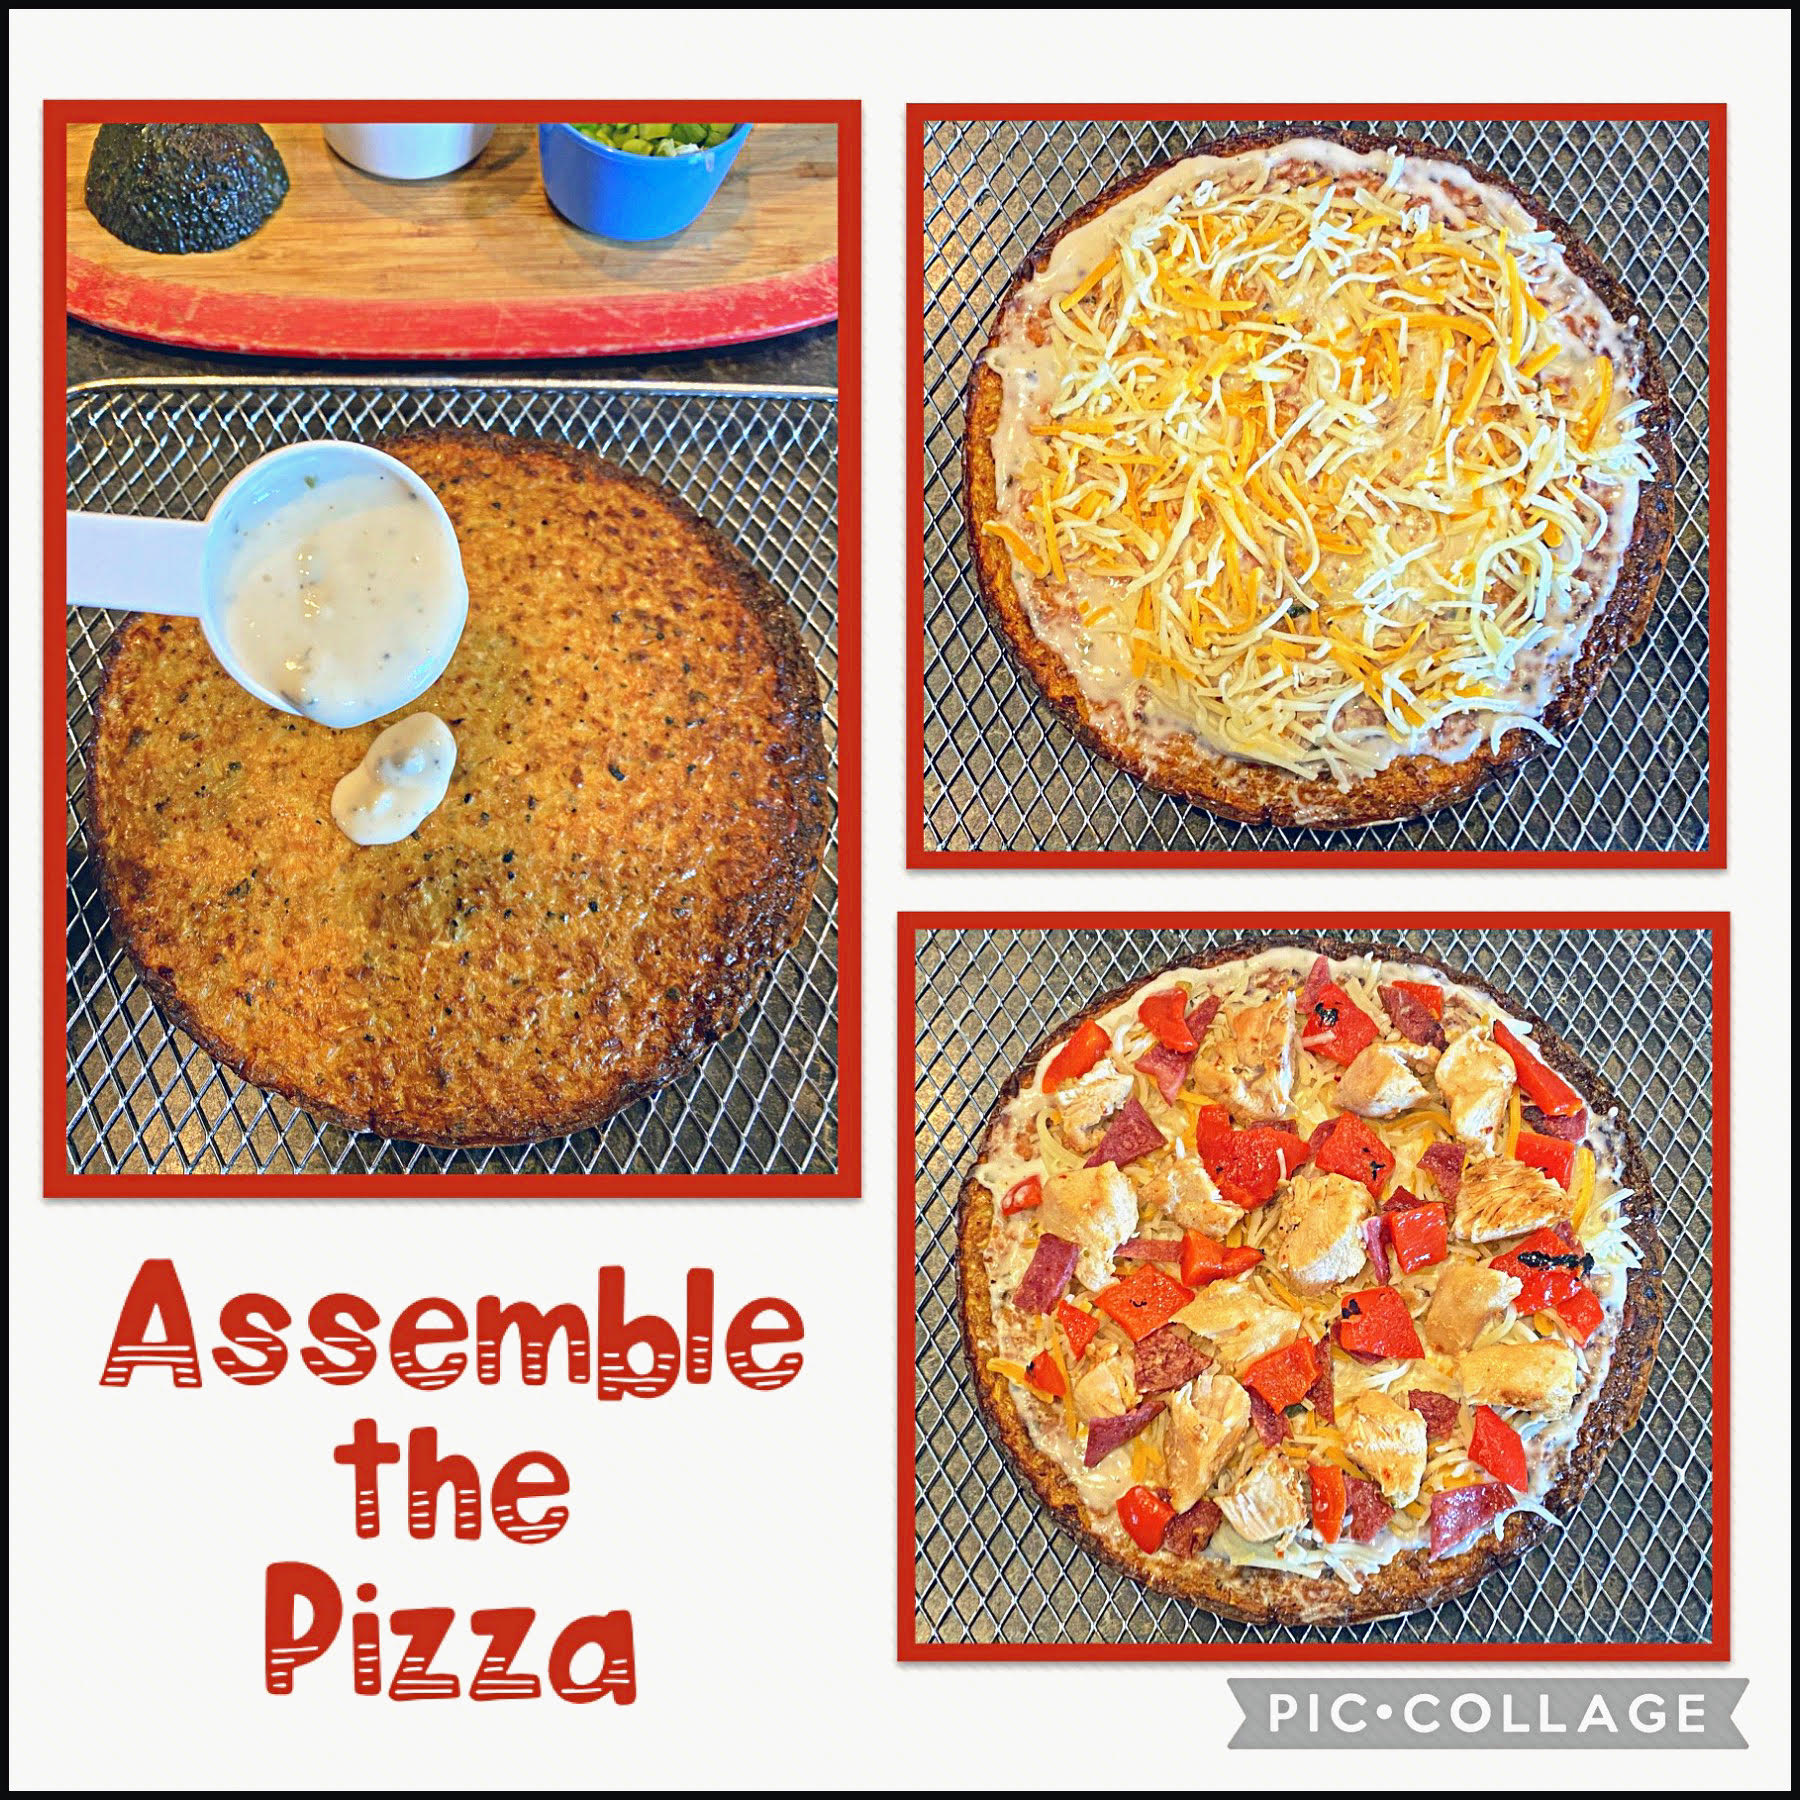 Outer Aisle Sandwich Thins and pizza crusts, 2019-03-07